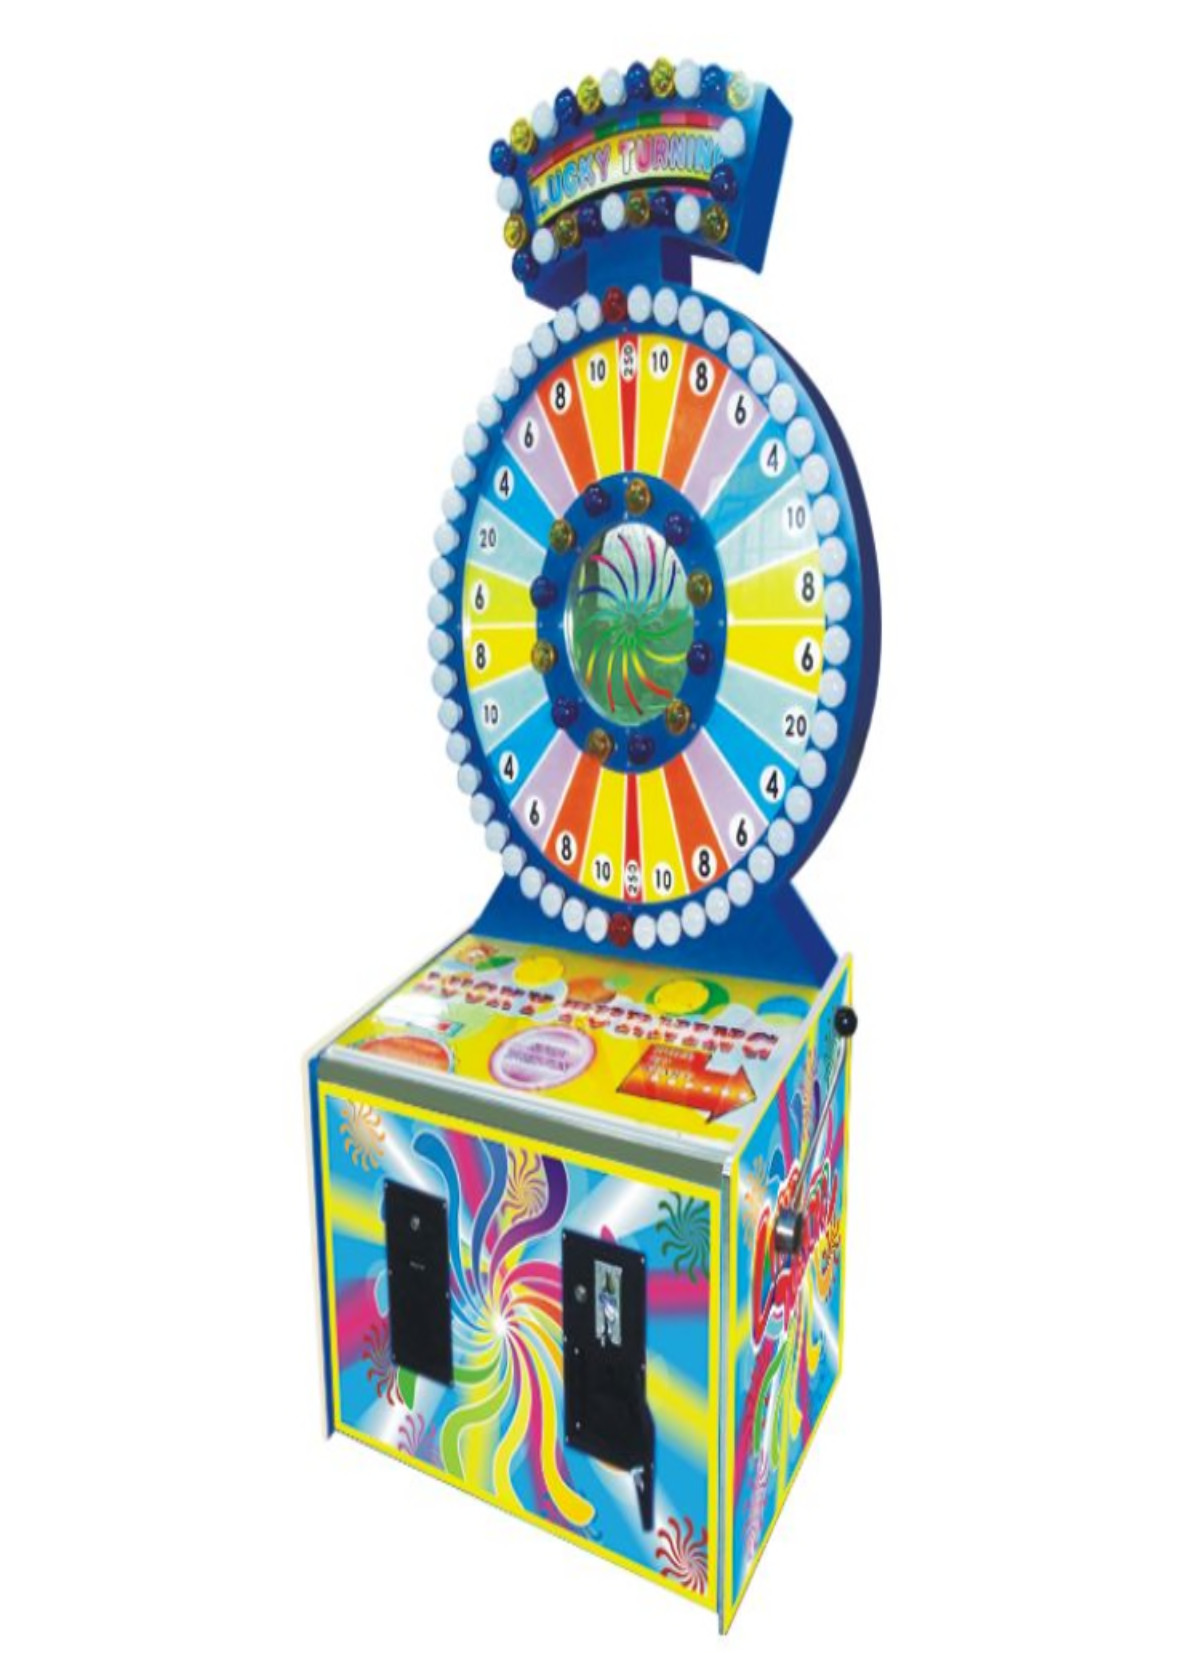 Cheap Game Center Ticket Redemption Machine Coin Operated Arcade Ticket Games for sale